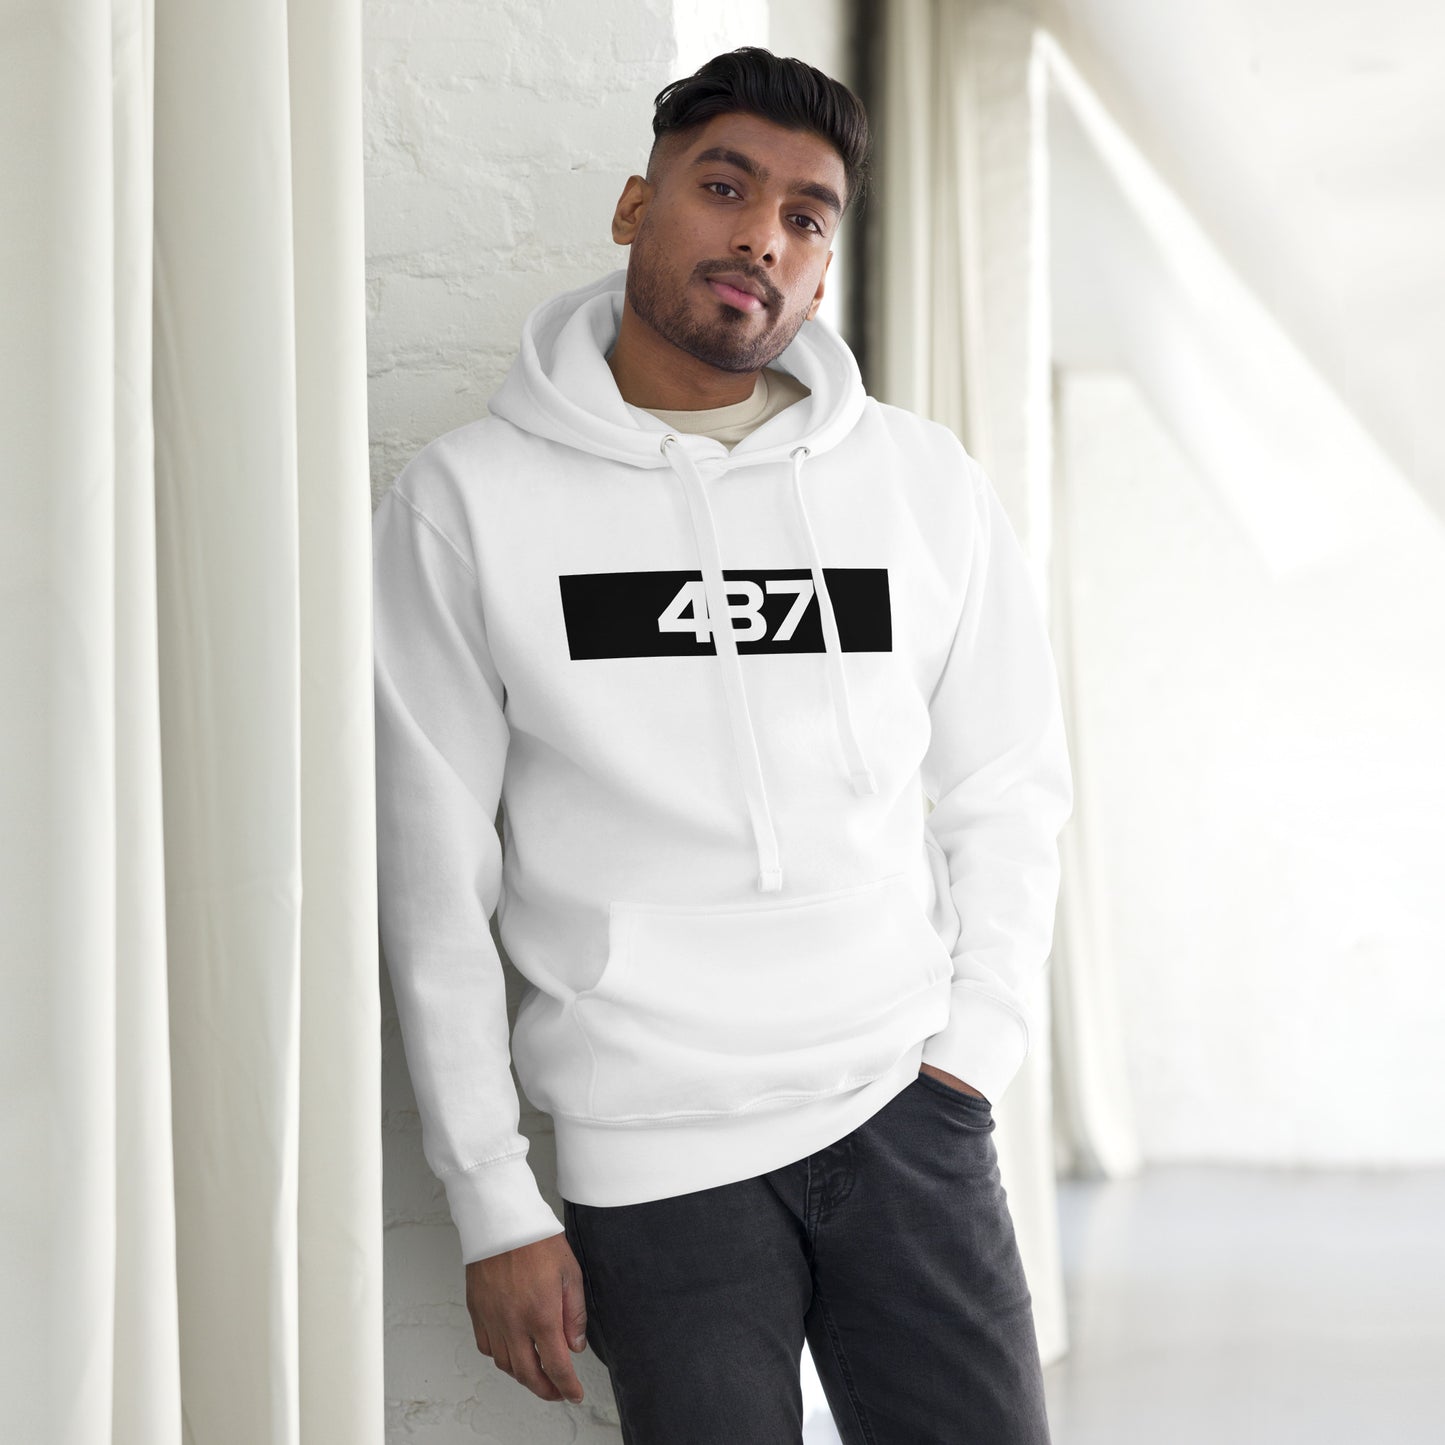 White Unisex 437 "You Don't Want This Life" Hoodie